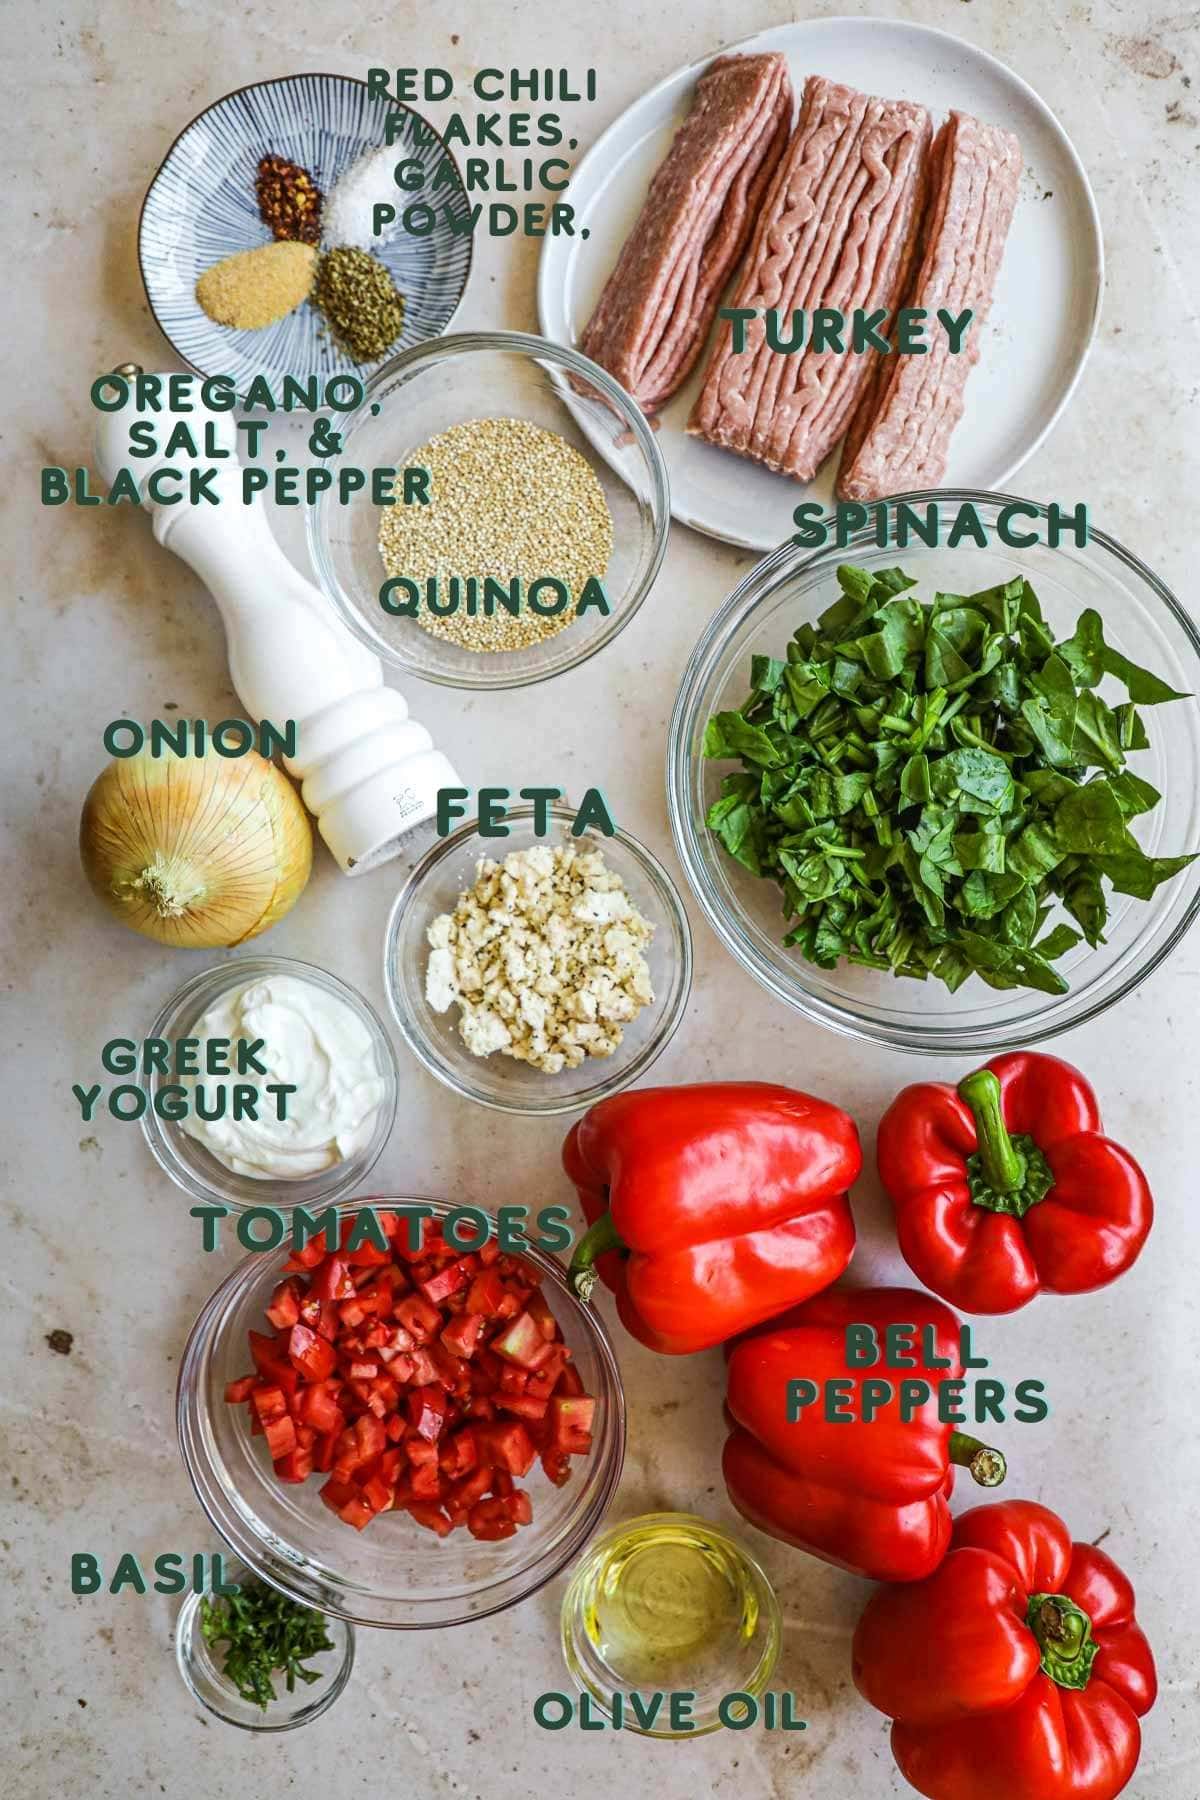 Ingredients to make quinoa and turkey bell peppers, including spices, tomatoes, feta, greek yogurt, spinach, basil, quinoa, and onion.